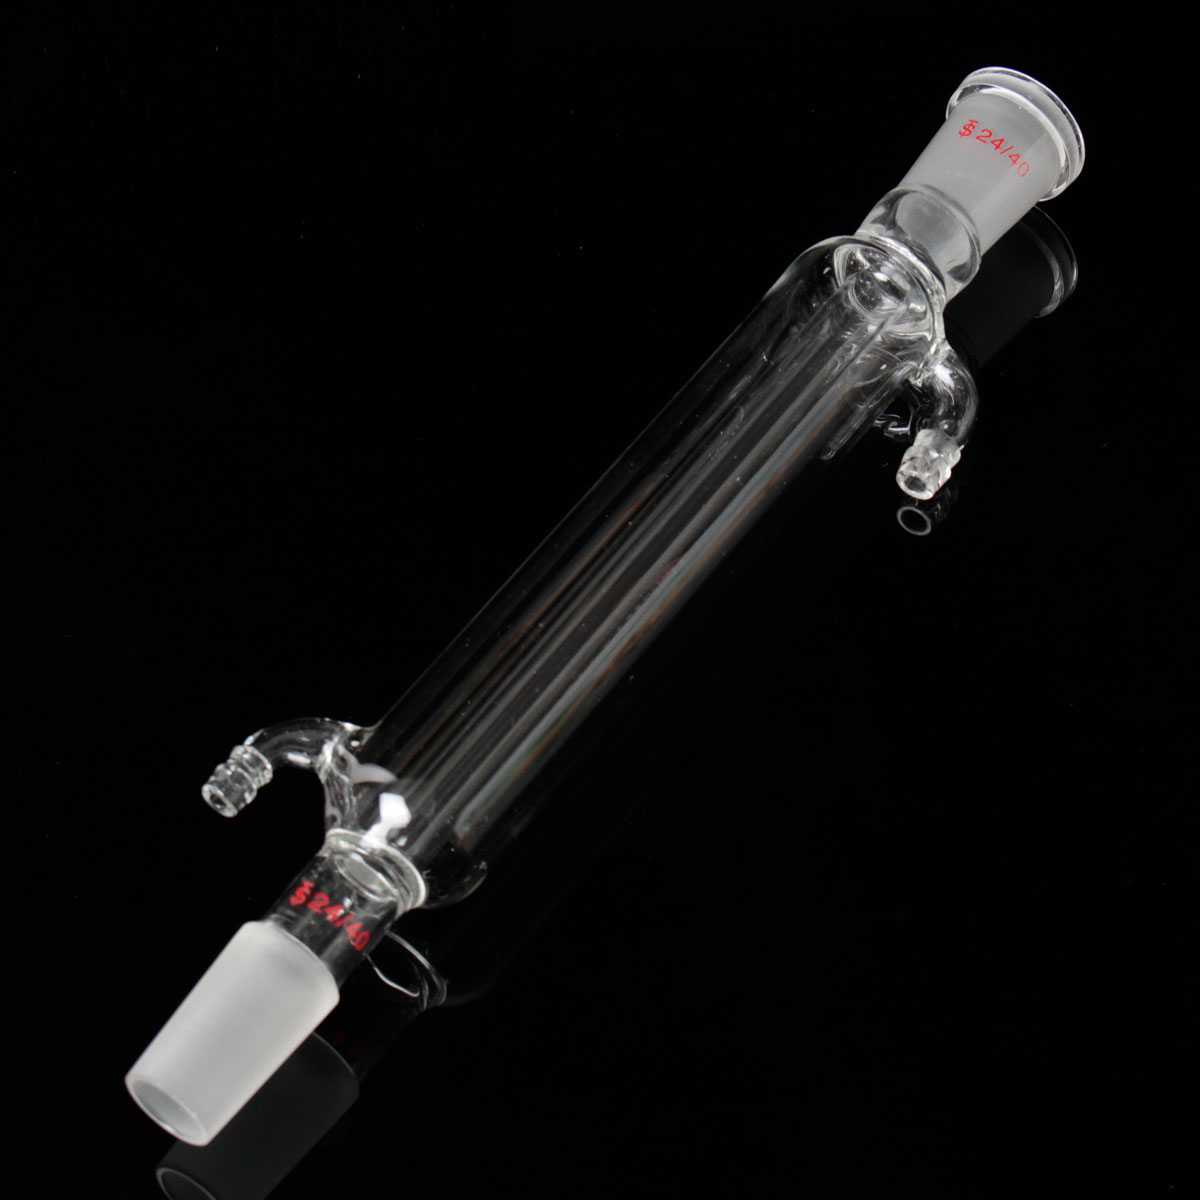 Find 1000ml 24/40 Distillation Apparatus Vacuum Distill Kit Vigreux Column With Arm for Sale on Gipsybee.com with cryptocurrencies